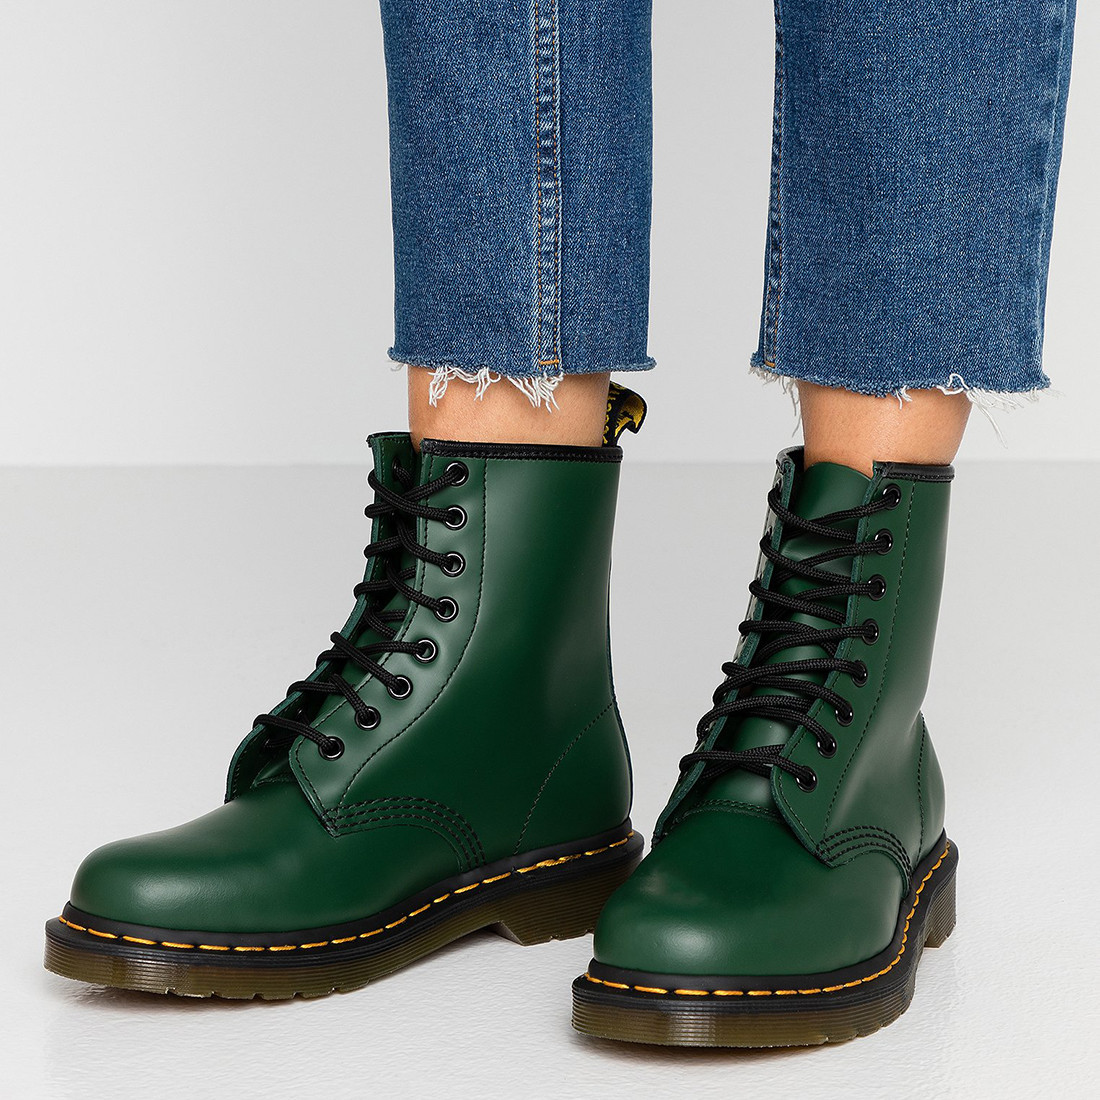 Dr. Martens 1460 Green Smooth boots in leather